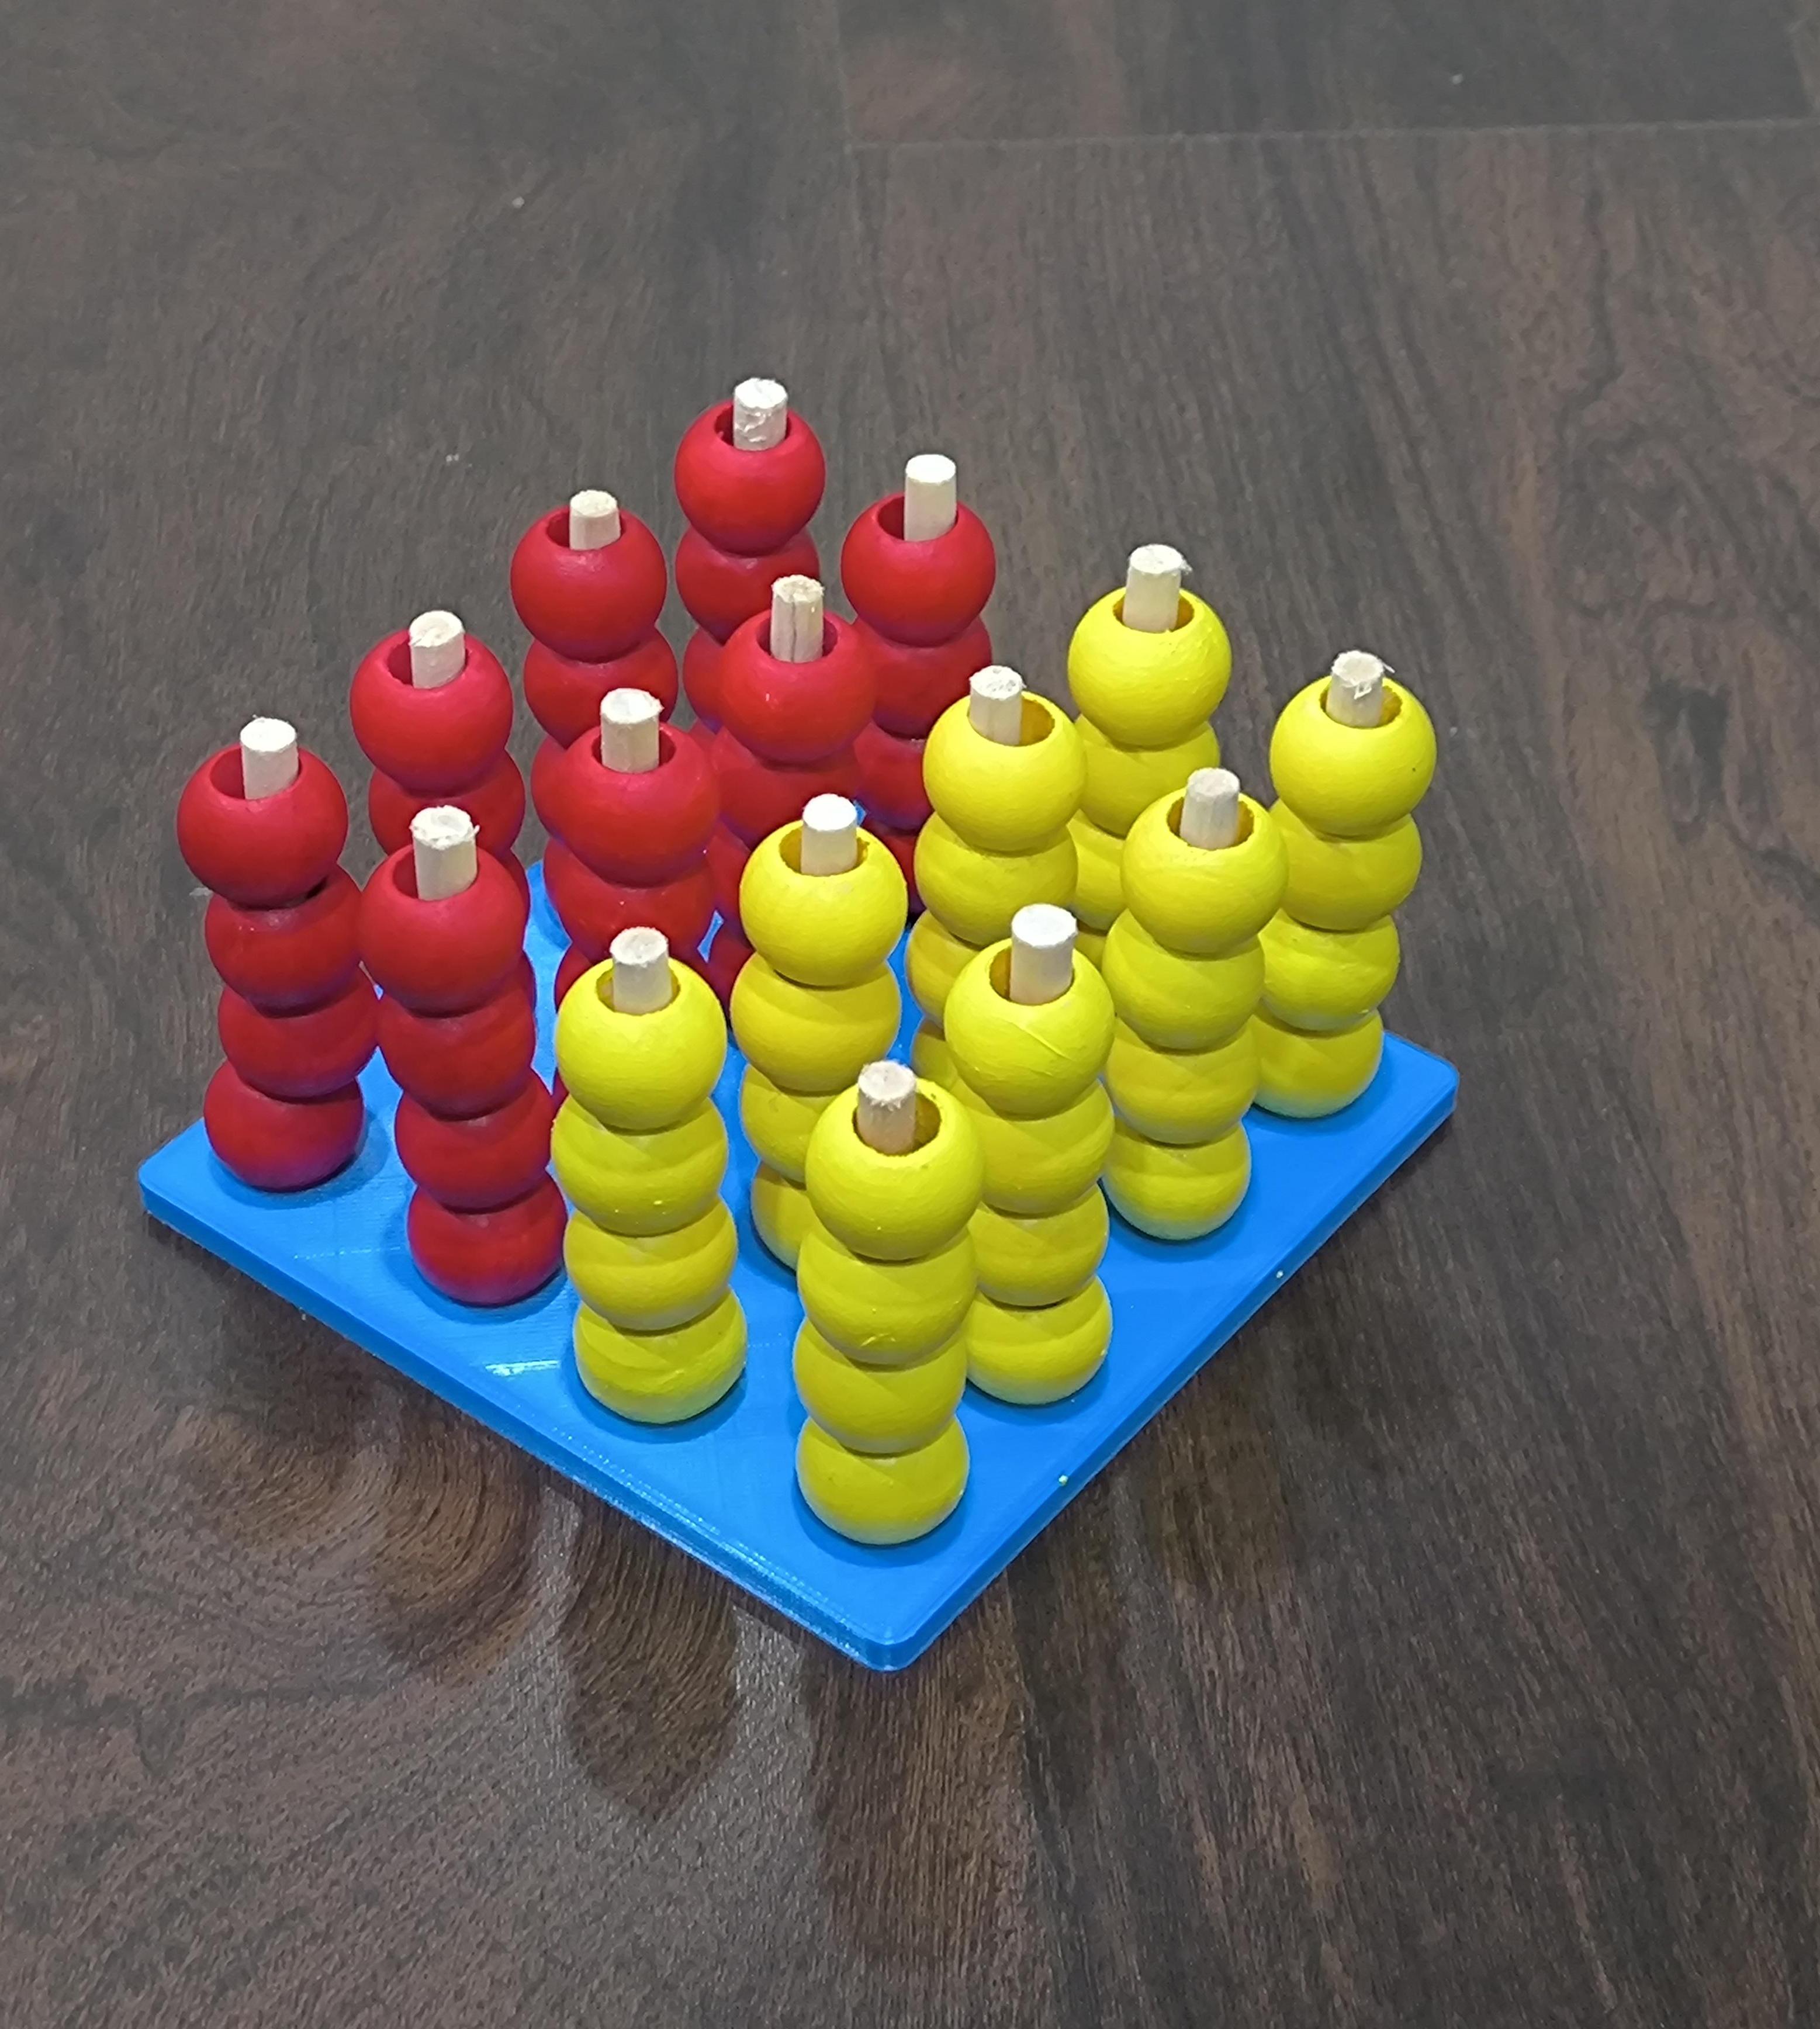 Connect 4 in 3d